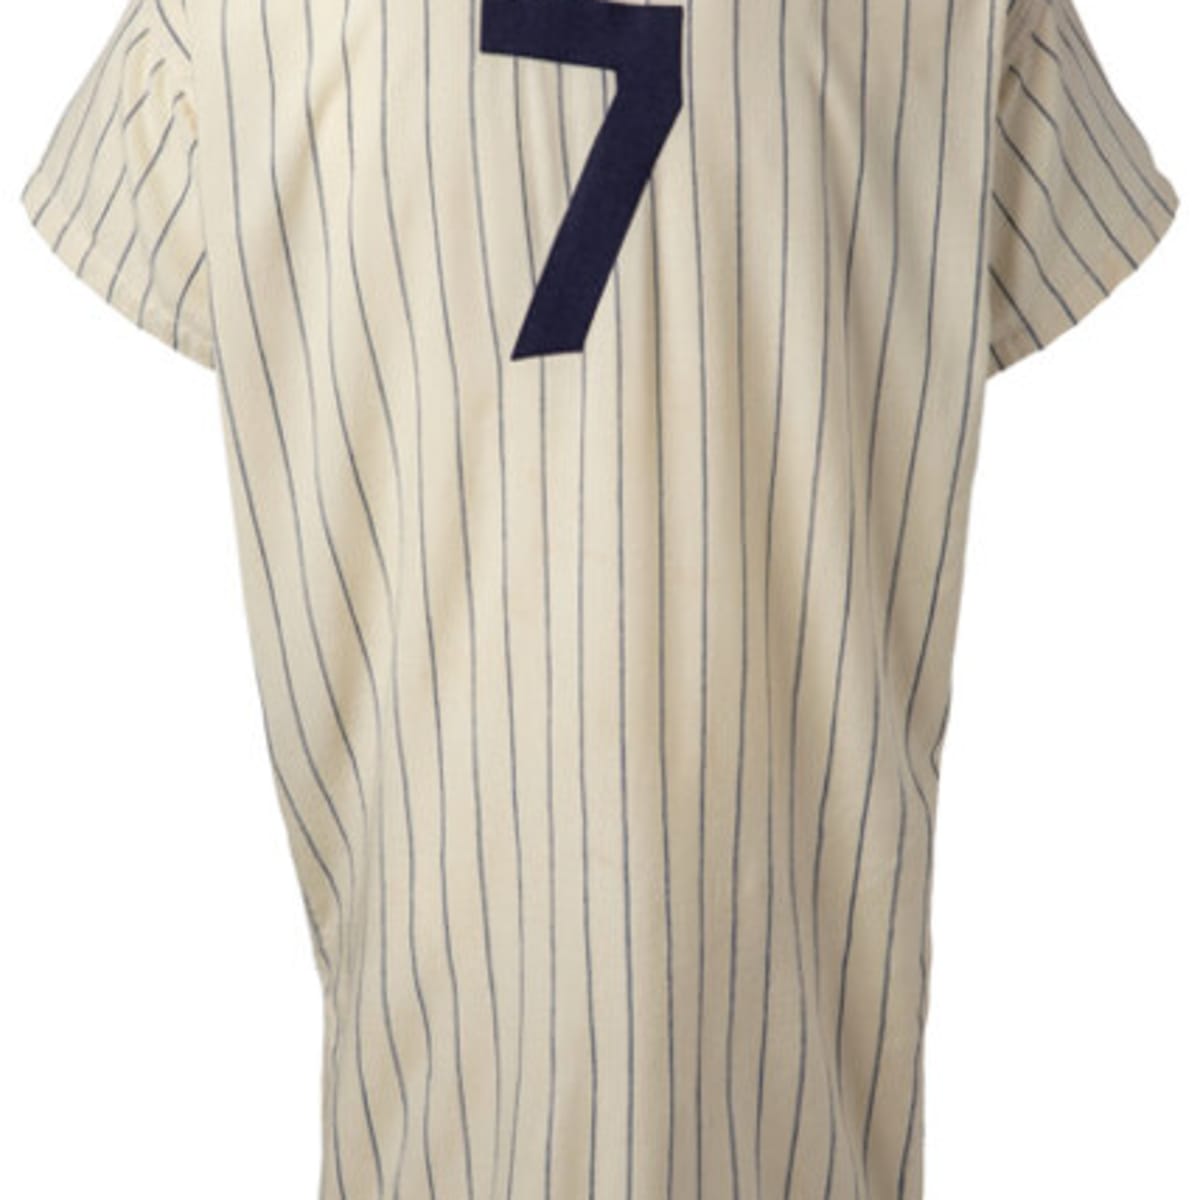 Mickey Mantle Yankees jersey from 1958 sells for record-shattering $4.68  million 